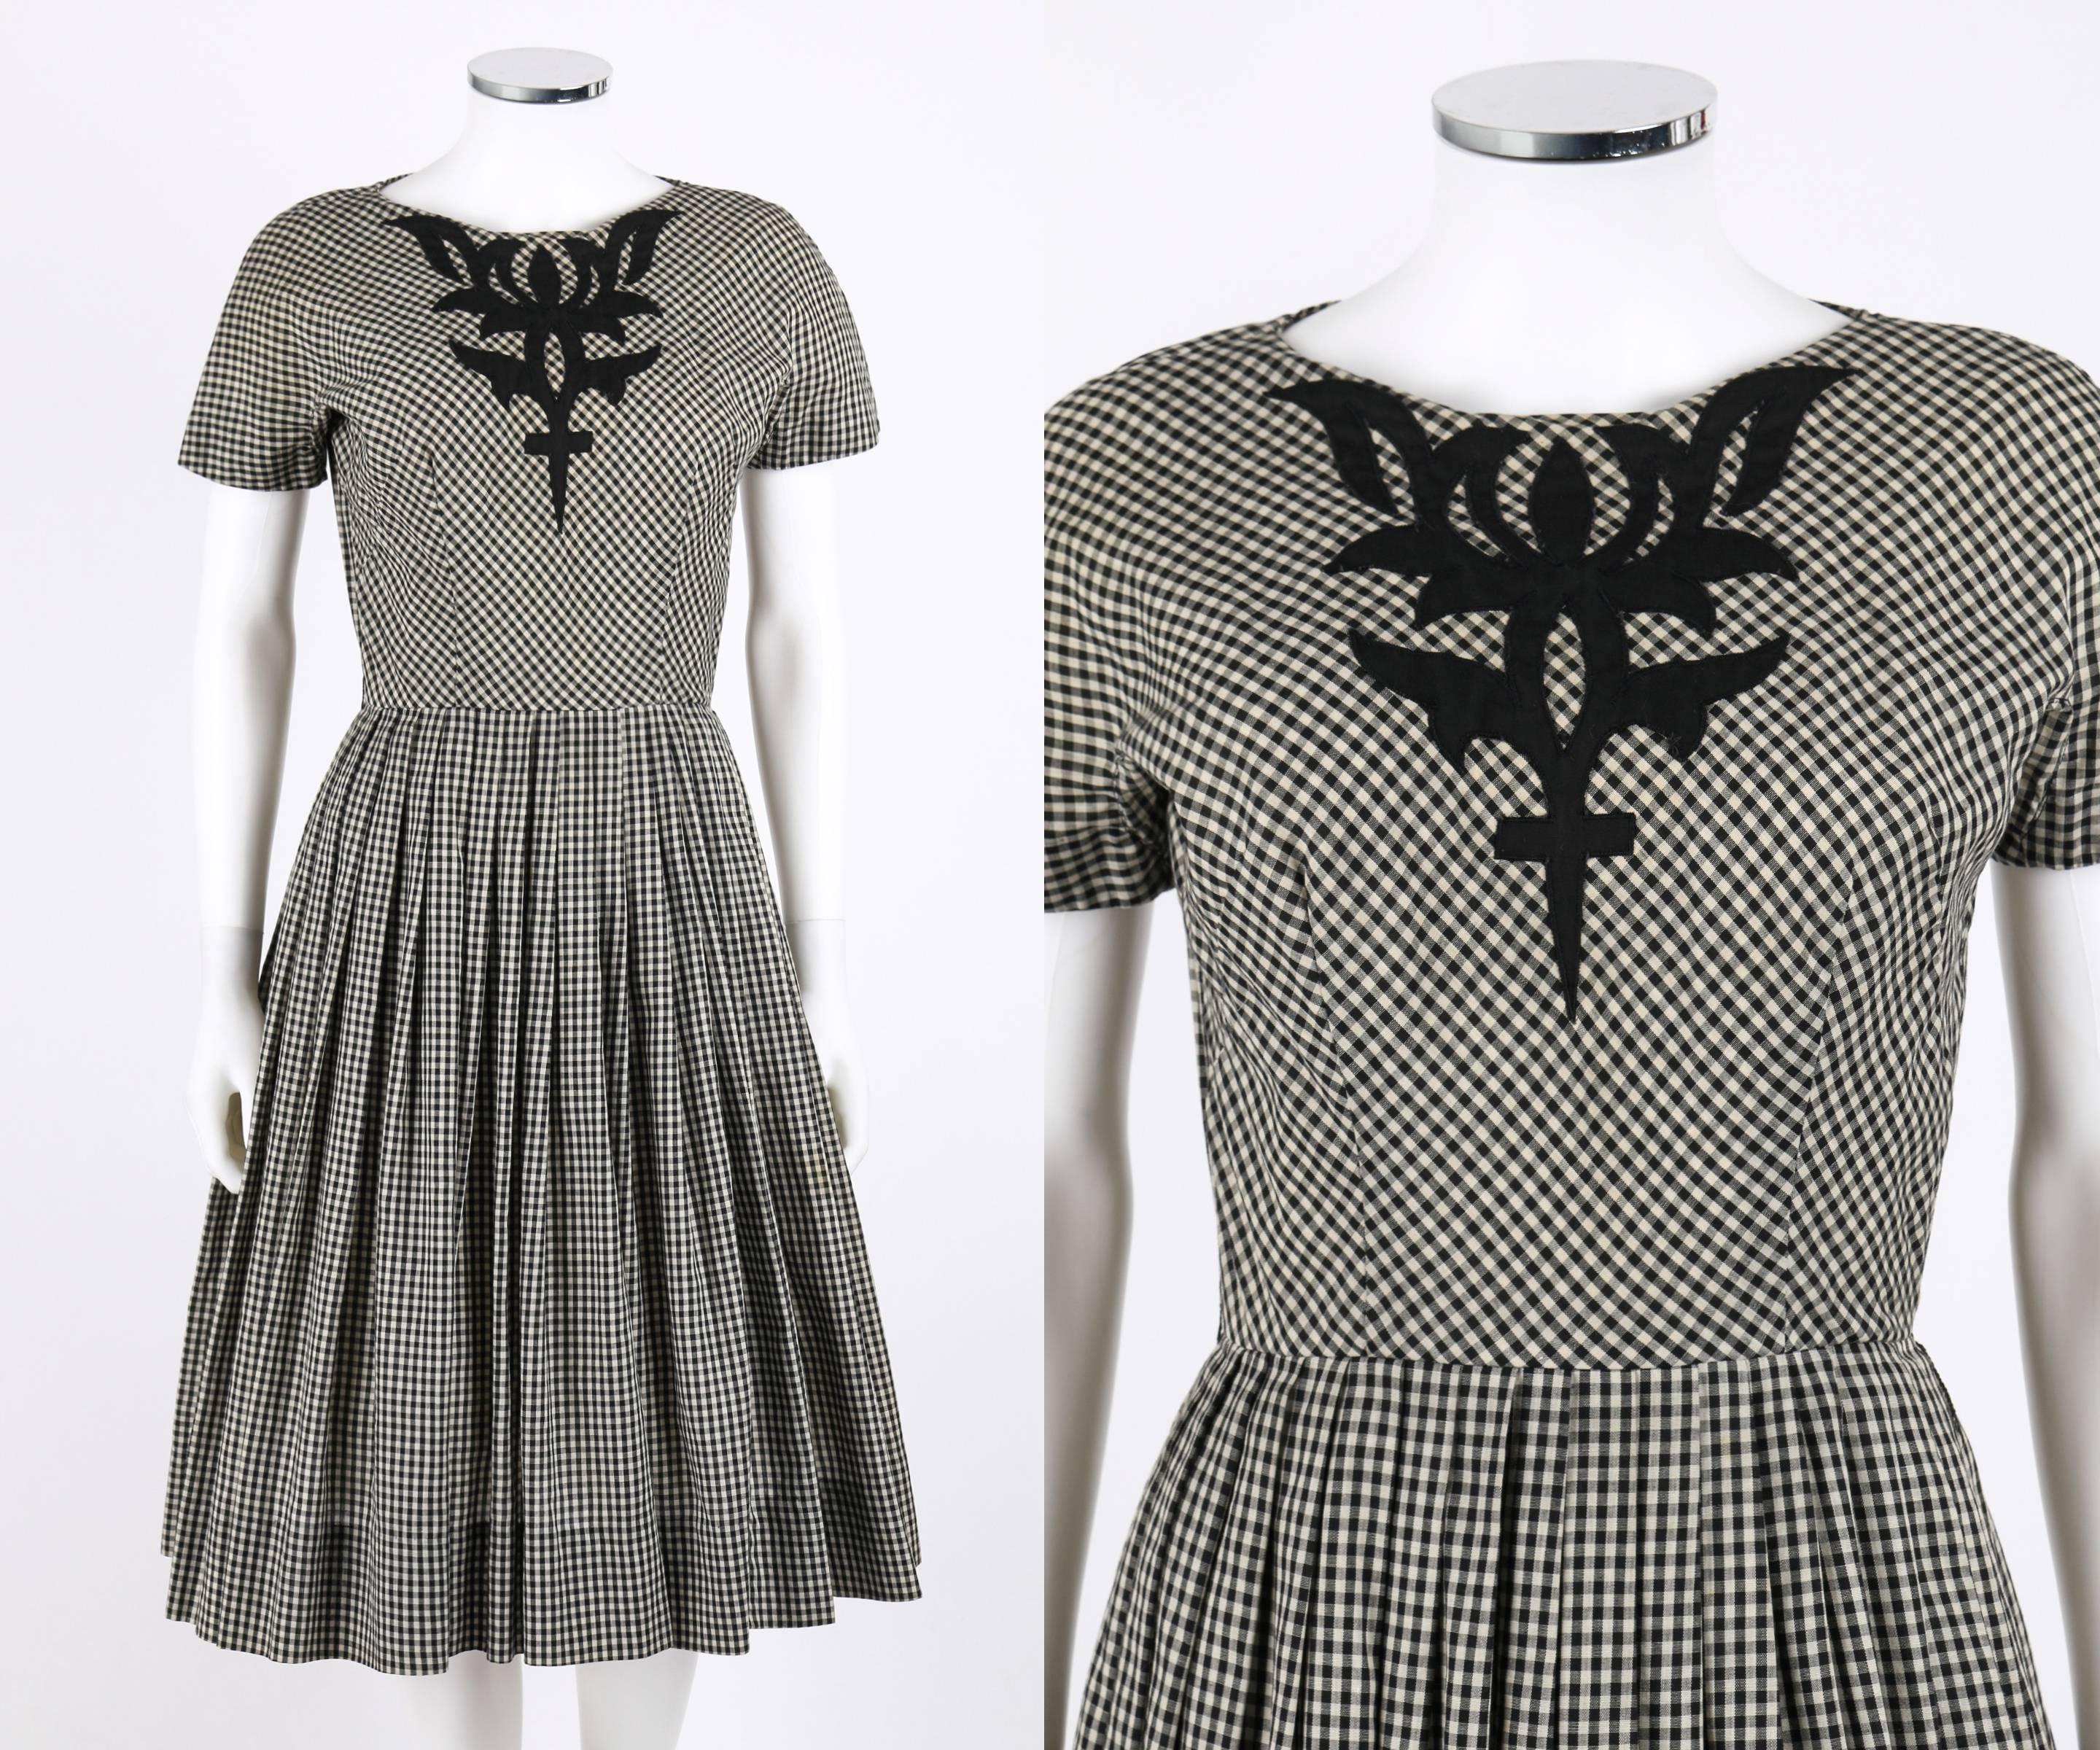 Vintage Jeanne Durrell (Lorch Co.) c.1950's black white gingham check day dress. Center front black avant garde applique. Short gusseted sleeves. Angled scoop neckline. Knife pleated skirt. Center back metal zipper with hook and bar closure at top.